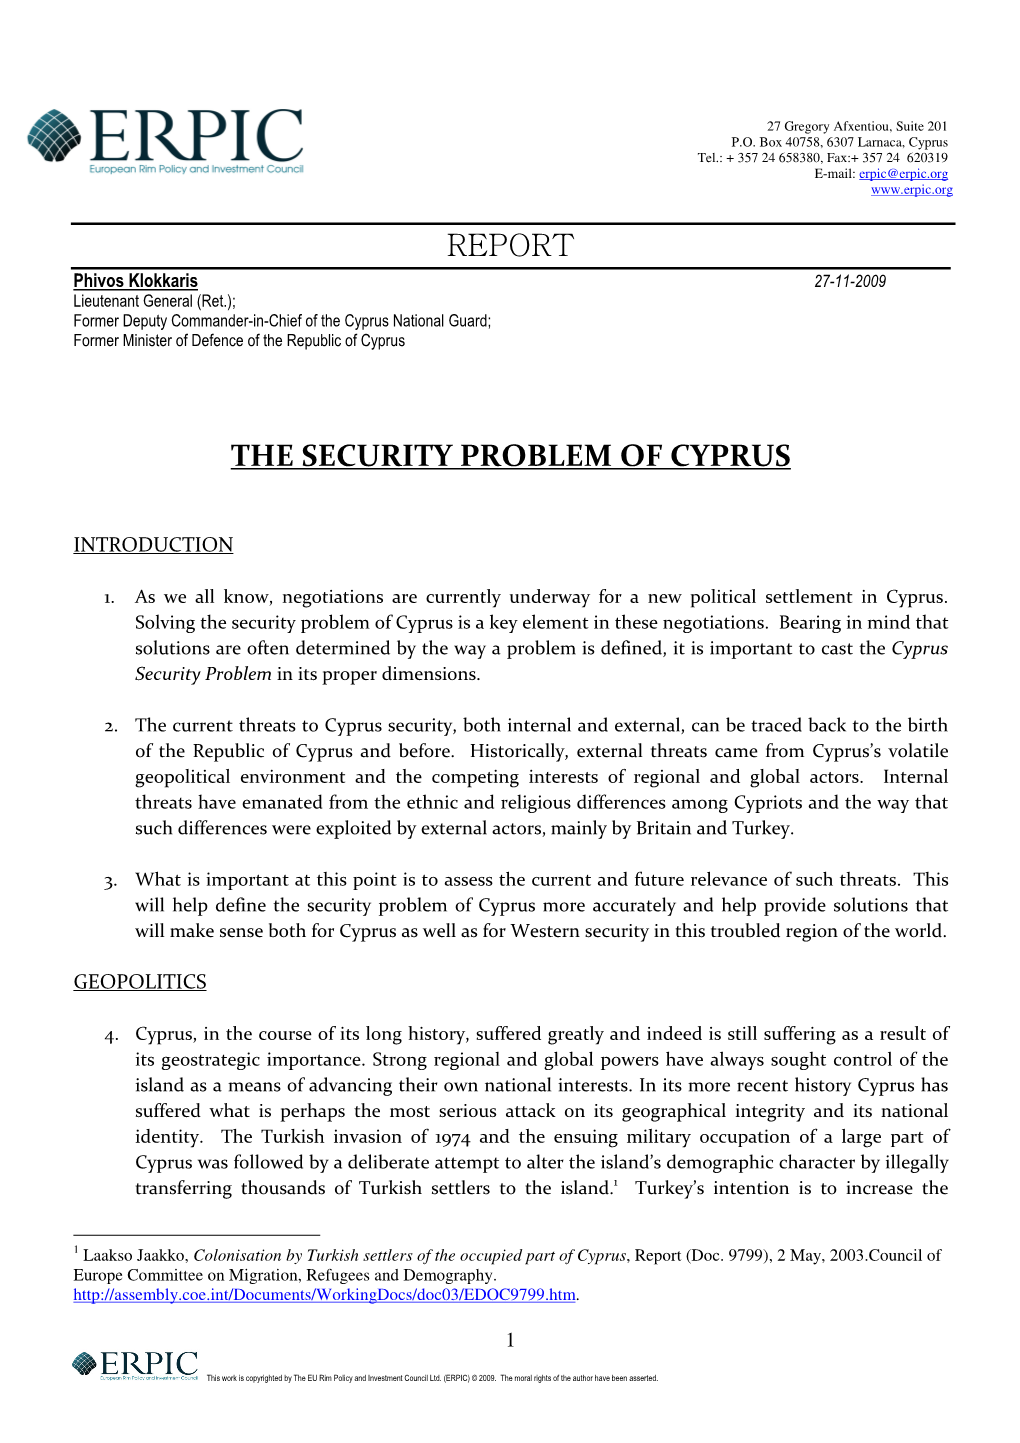 Report the Security Problem of Cyprus